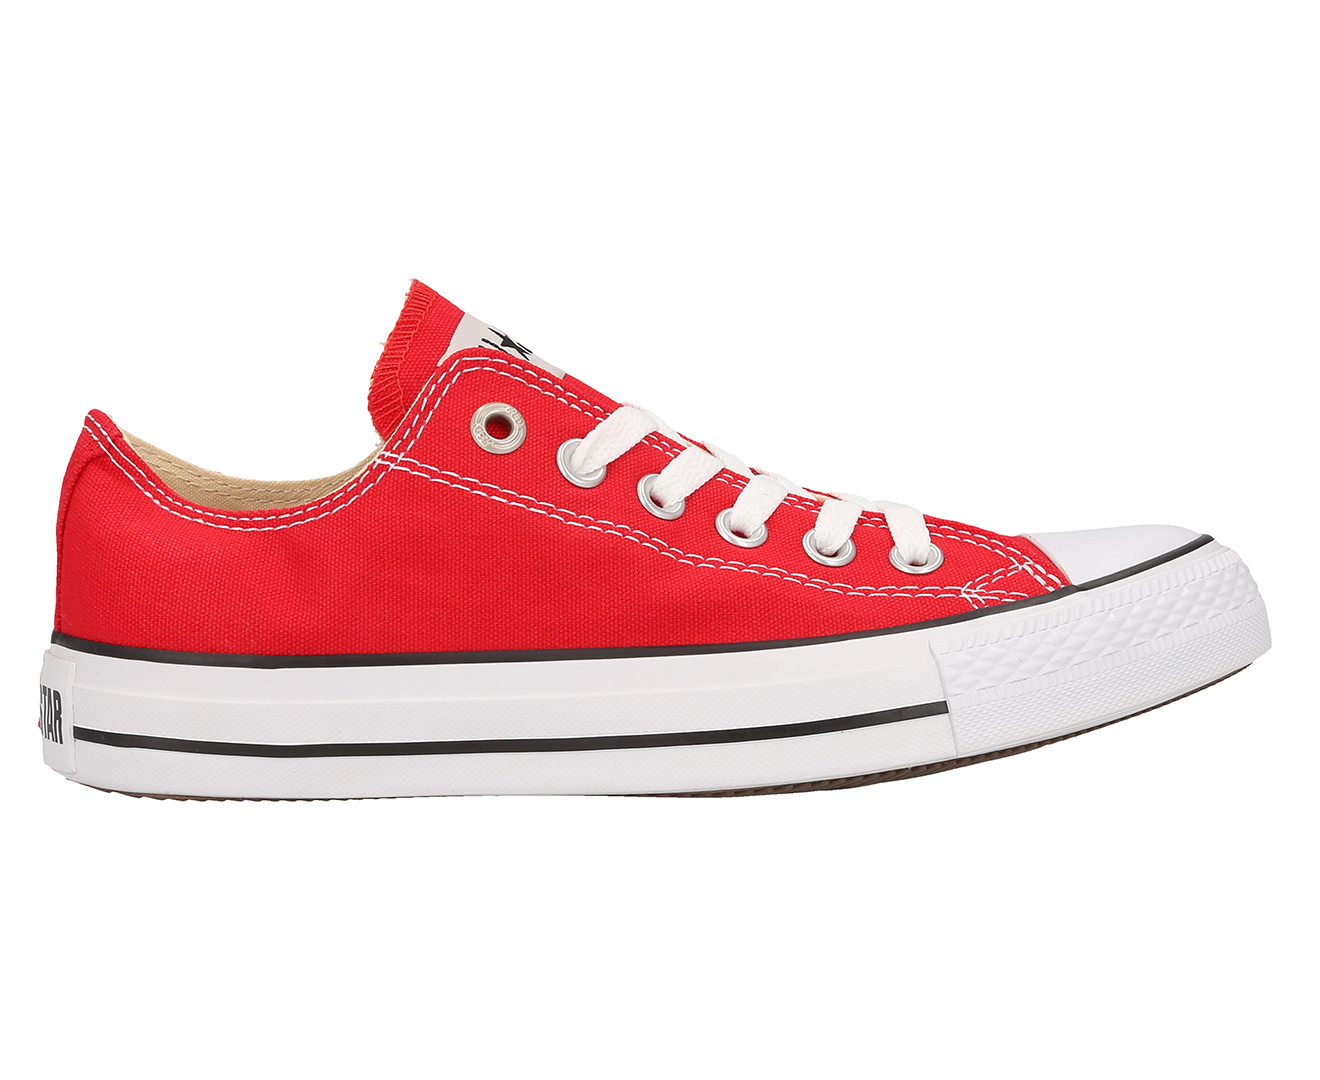 Converse Chuck Taylor All Star Shoe - Ox Red | Catch.co.nz